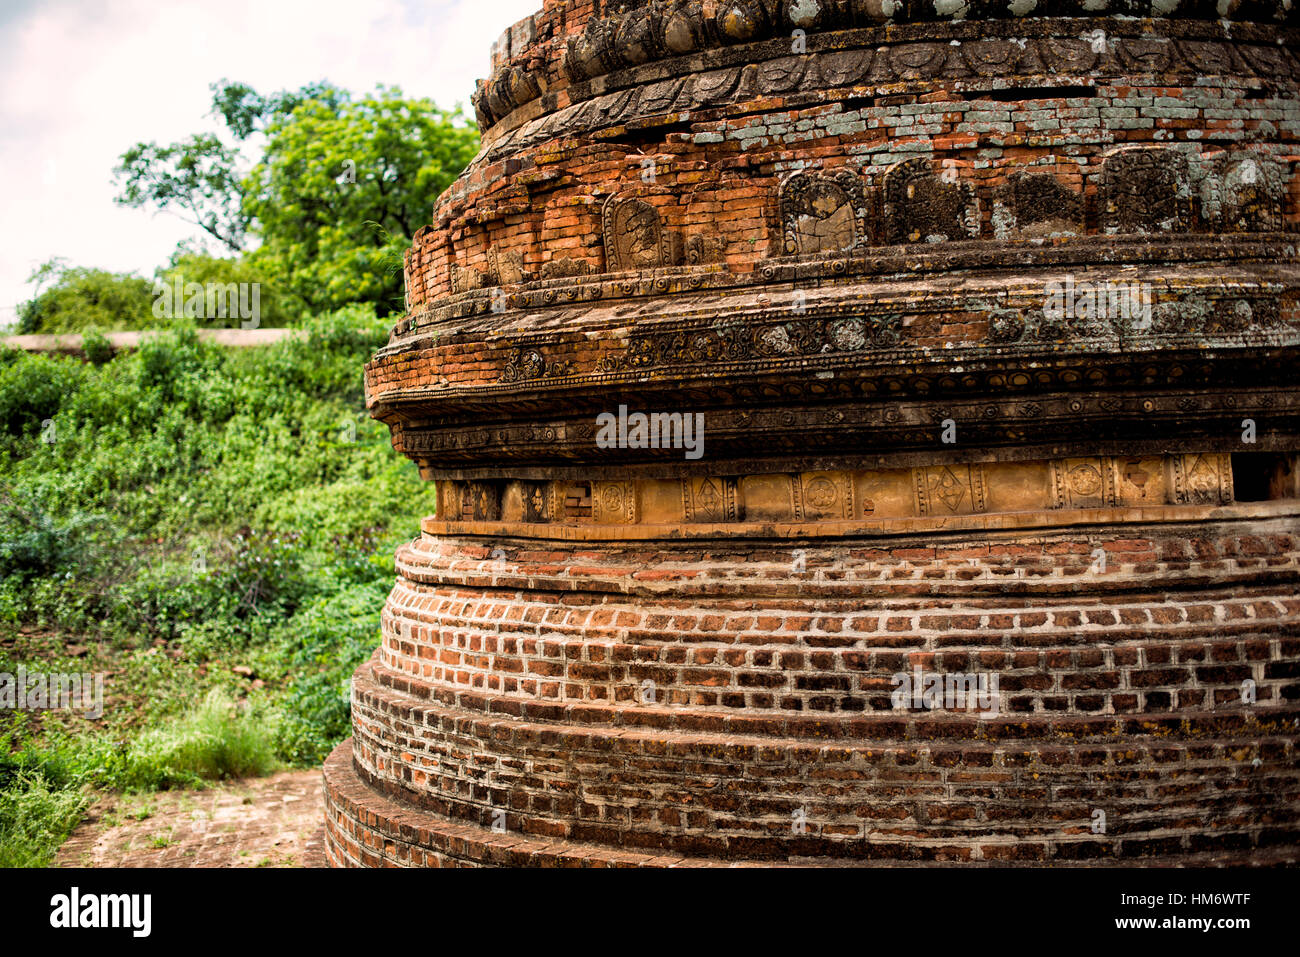 BAGAN, Myanmar - A cluster of small pagodas and stupas in the eastern part of the Bagan Archaeological Zone near Lemyethna Pagoda. Stock Photo